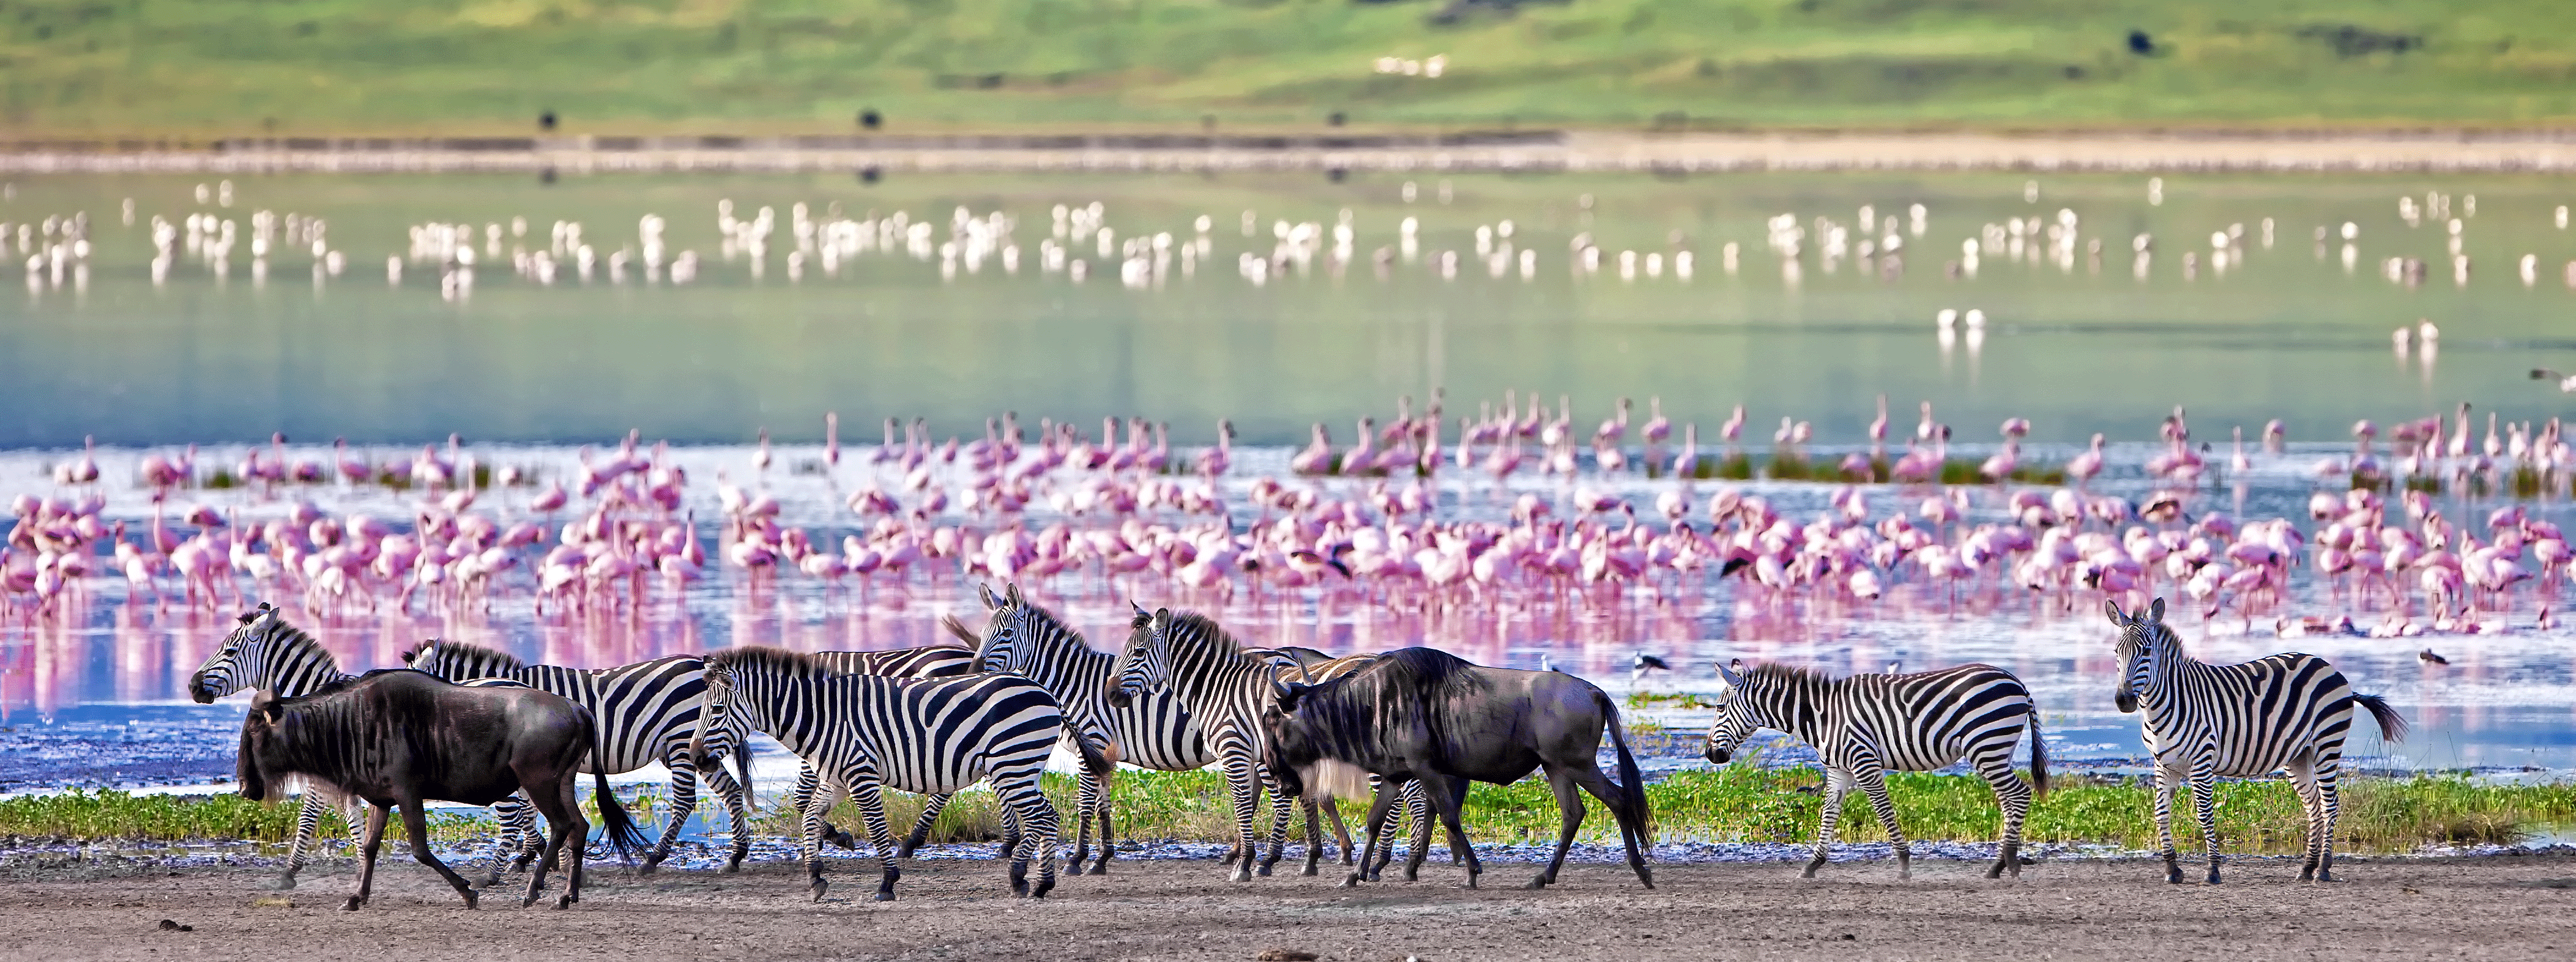 /resource/Images/Tanzania_Kenya/headerimage/Zebras-and-wildebeests-walking-beside-the-lake-in-the-Ngorongoro-Crater,-Tanzania,-flamingos-in-the-background.png